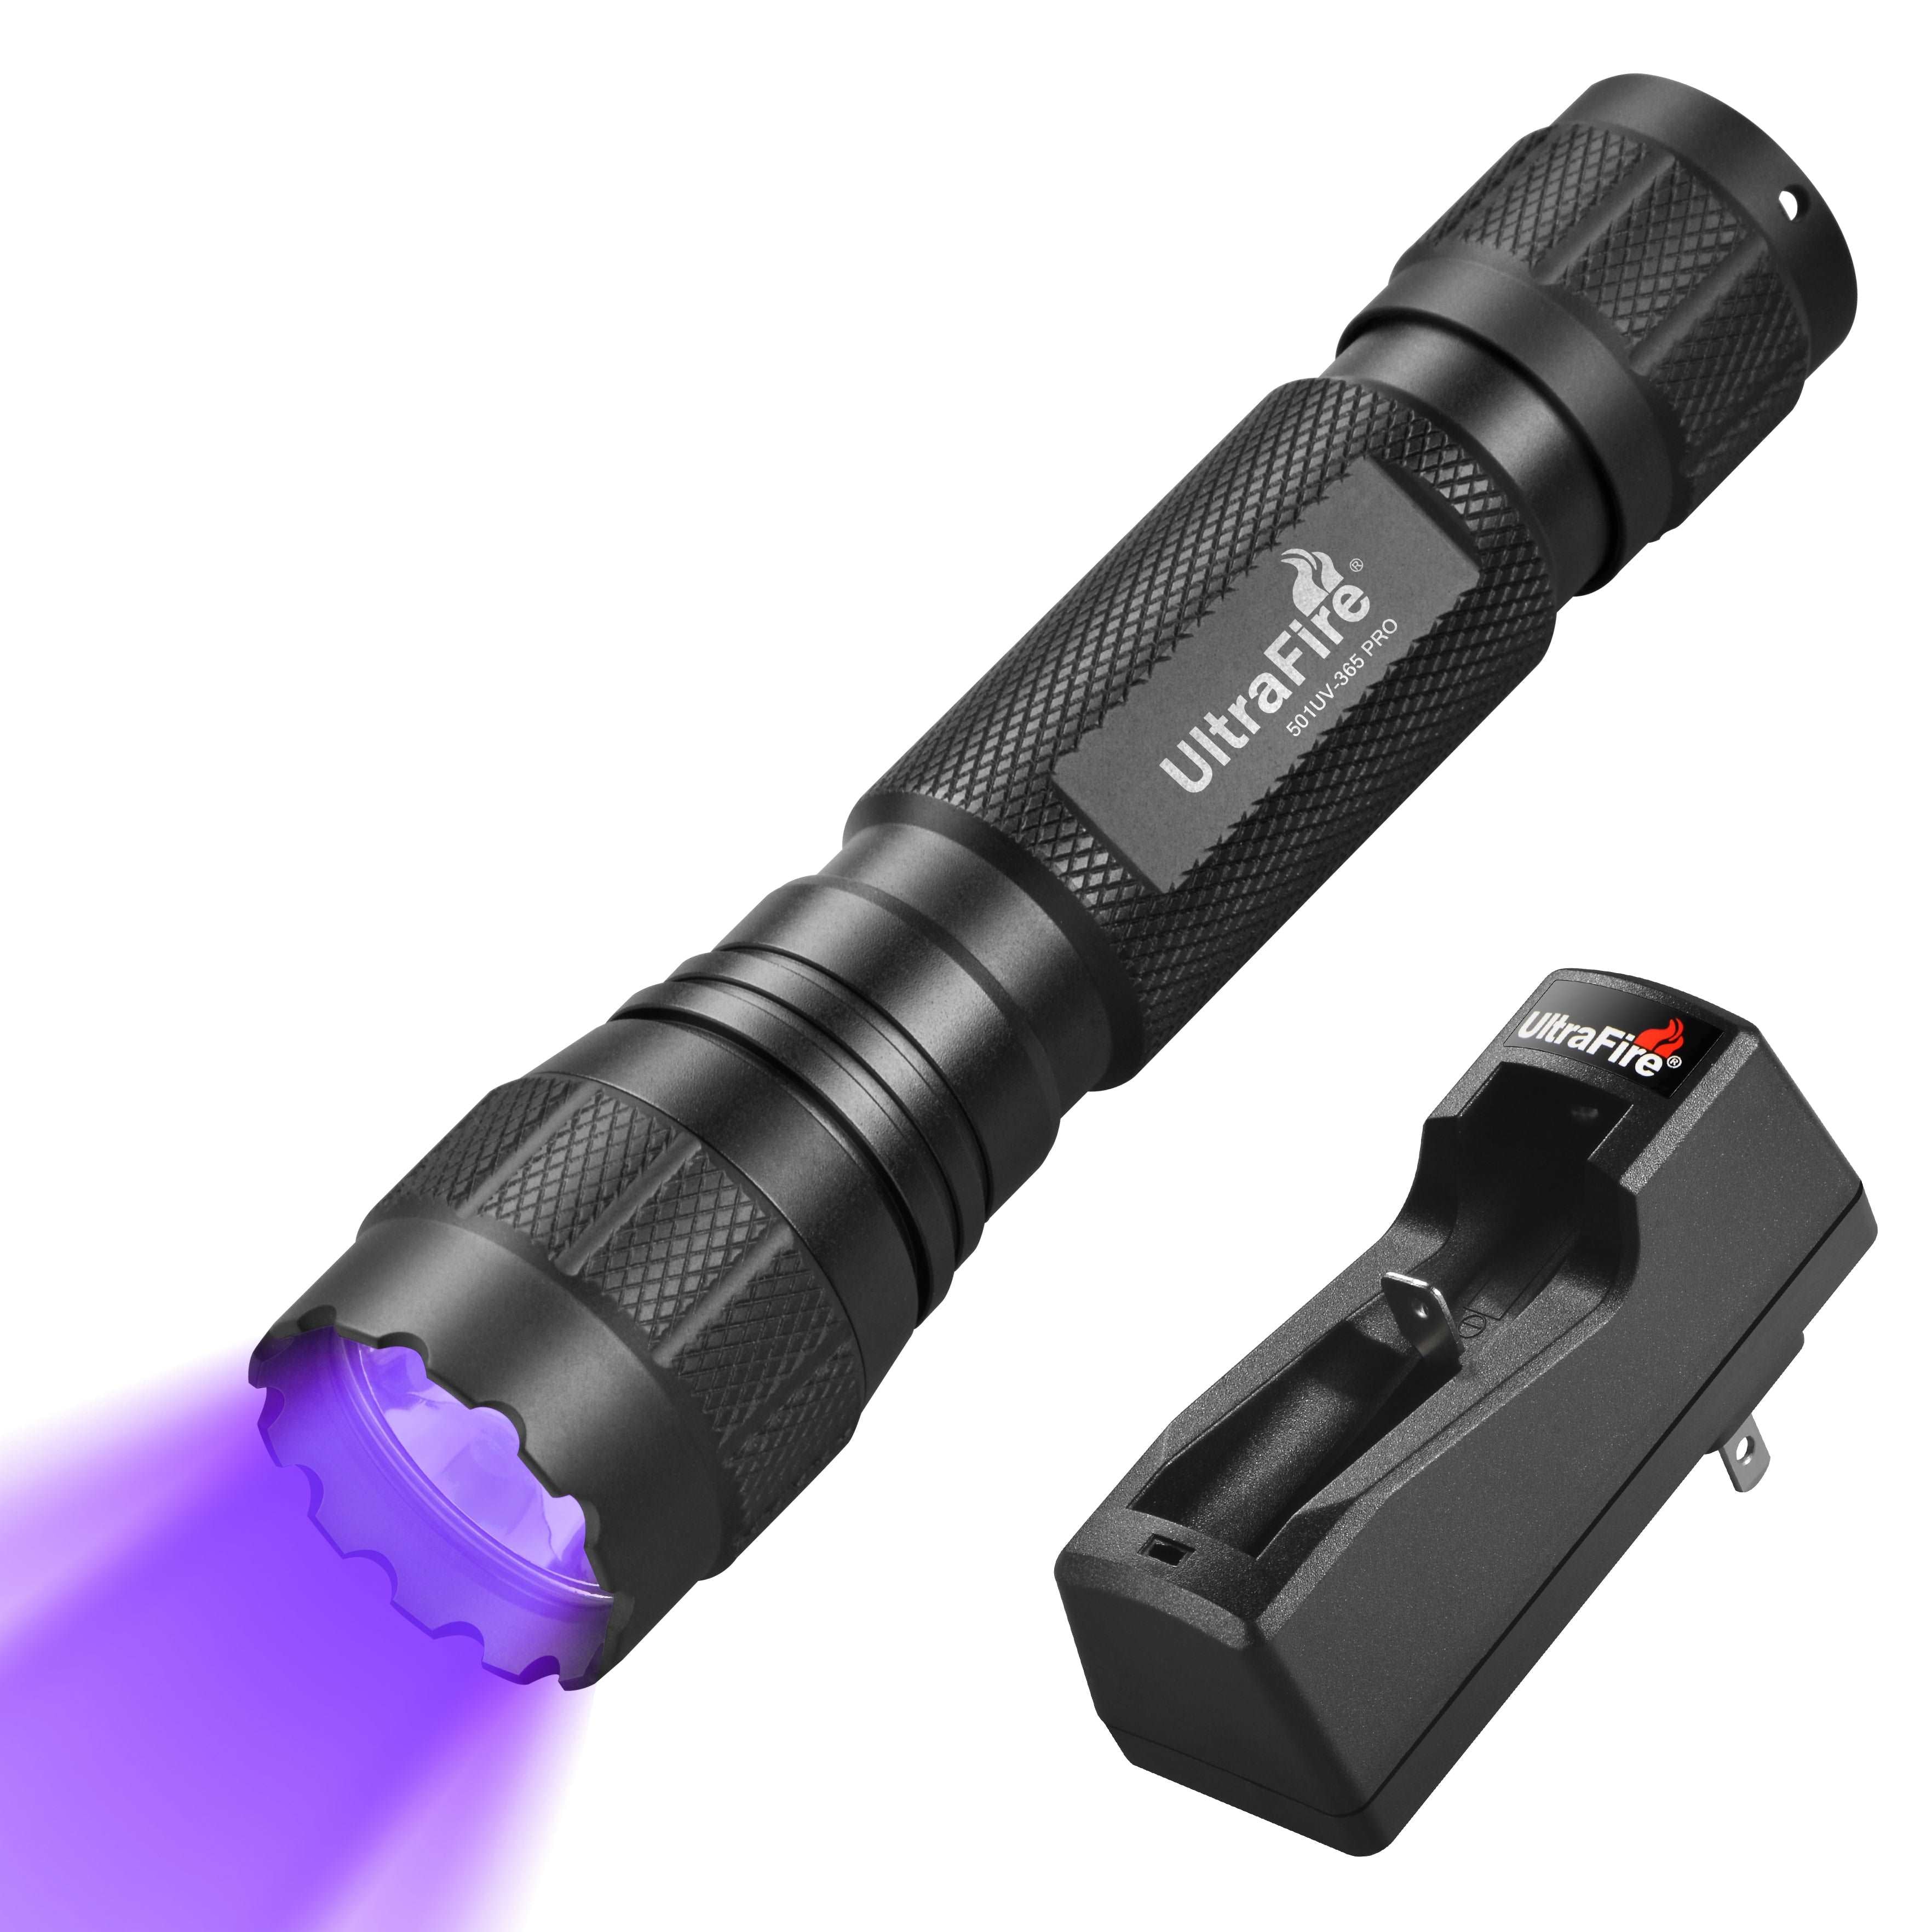 #Included_Flashlight Package